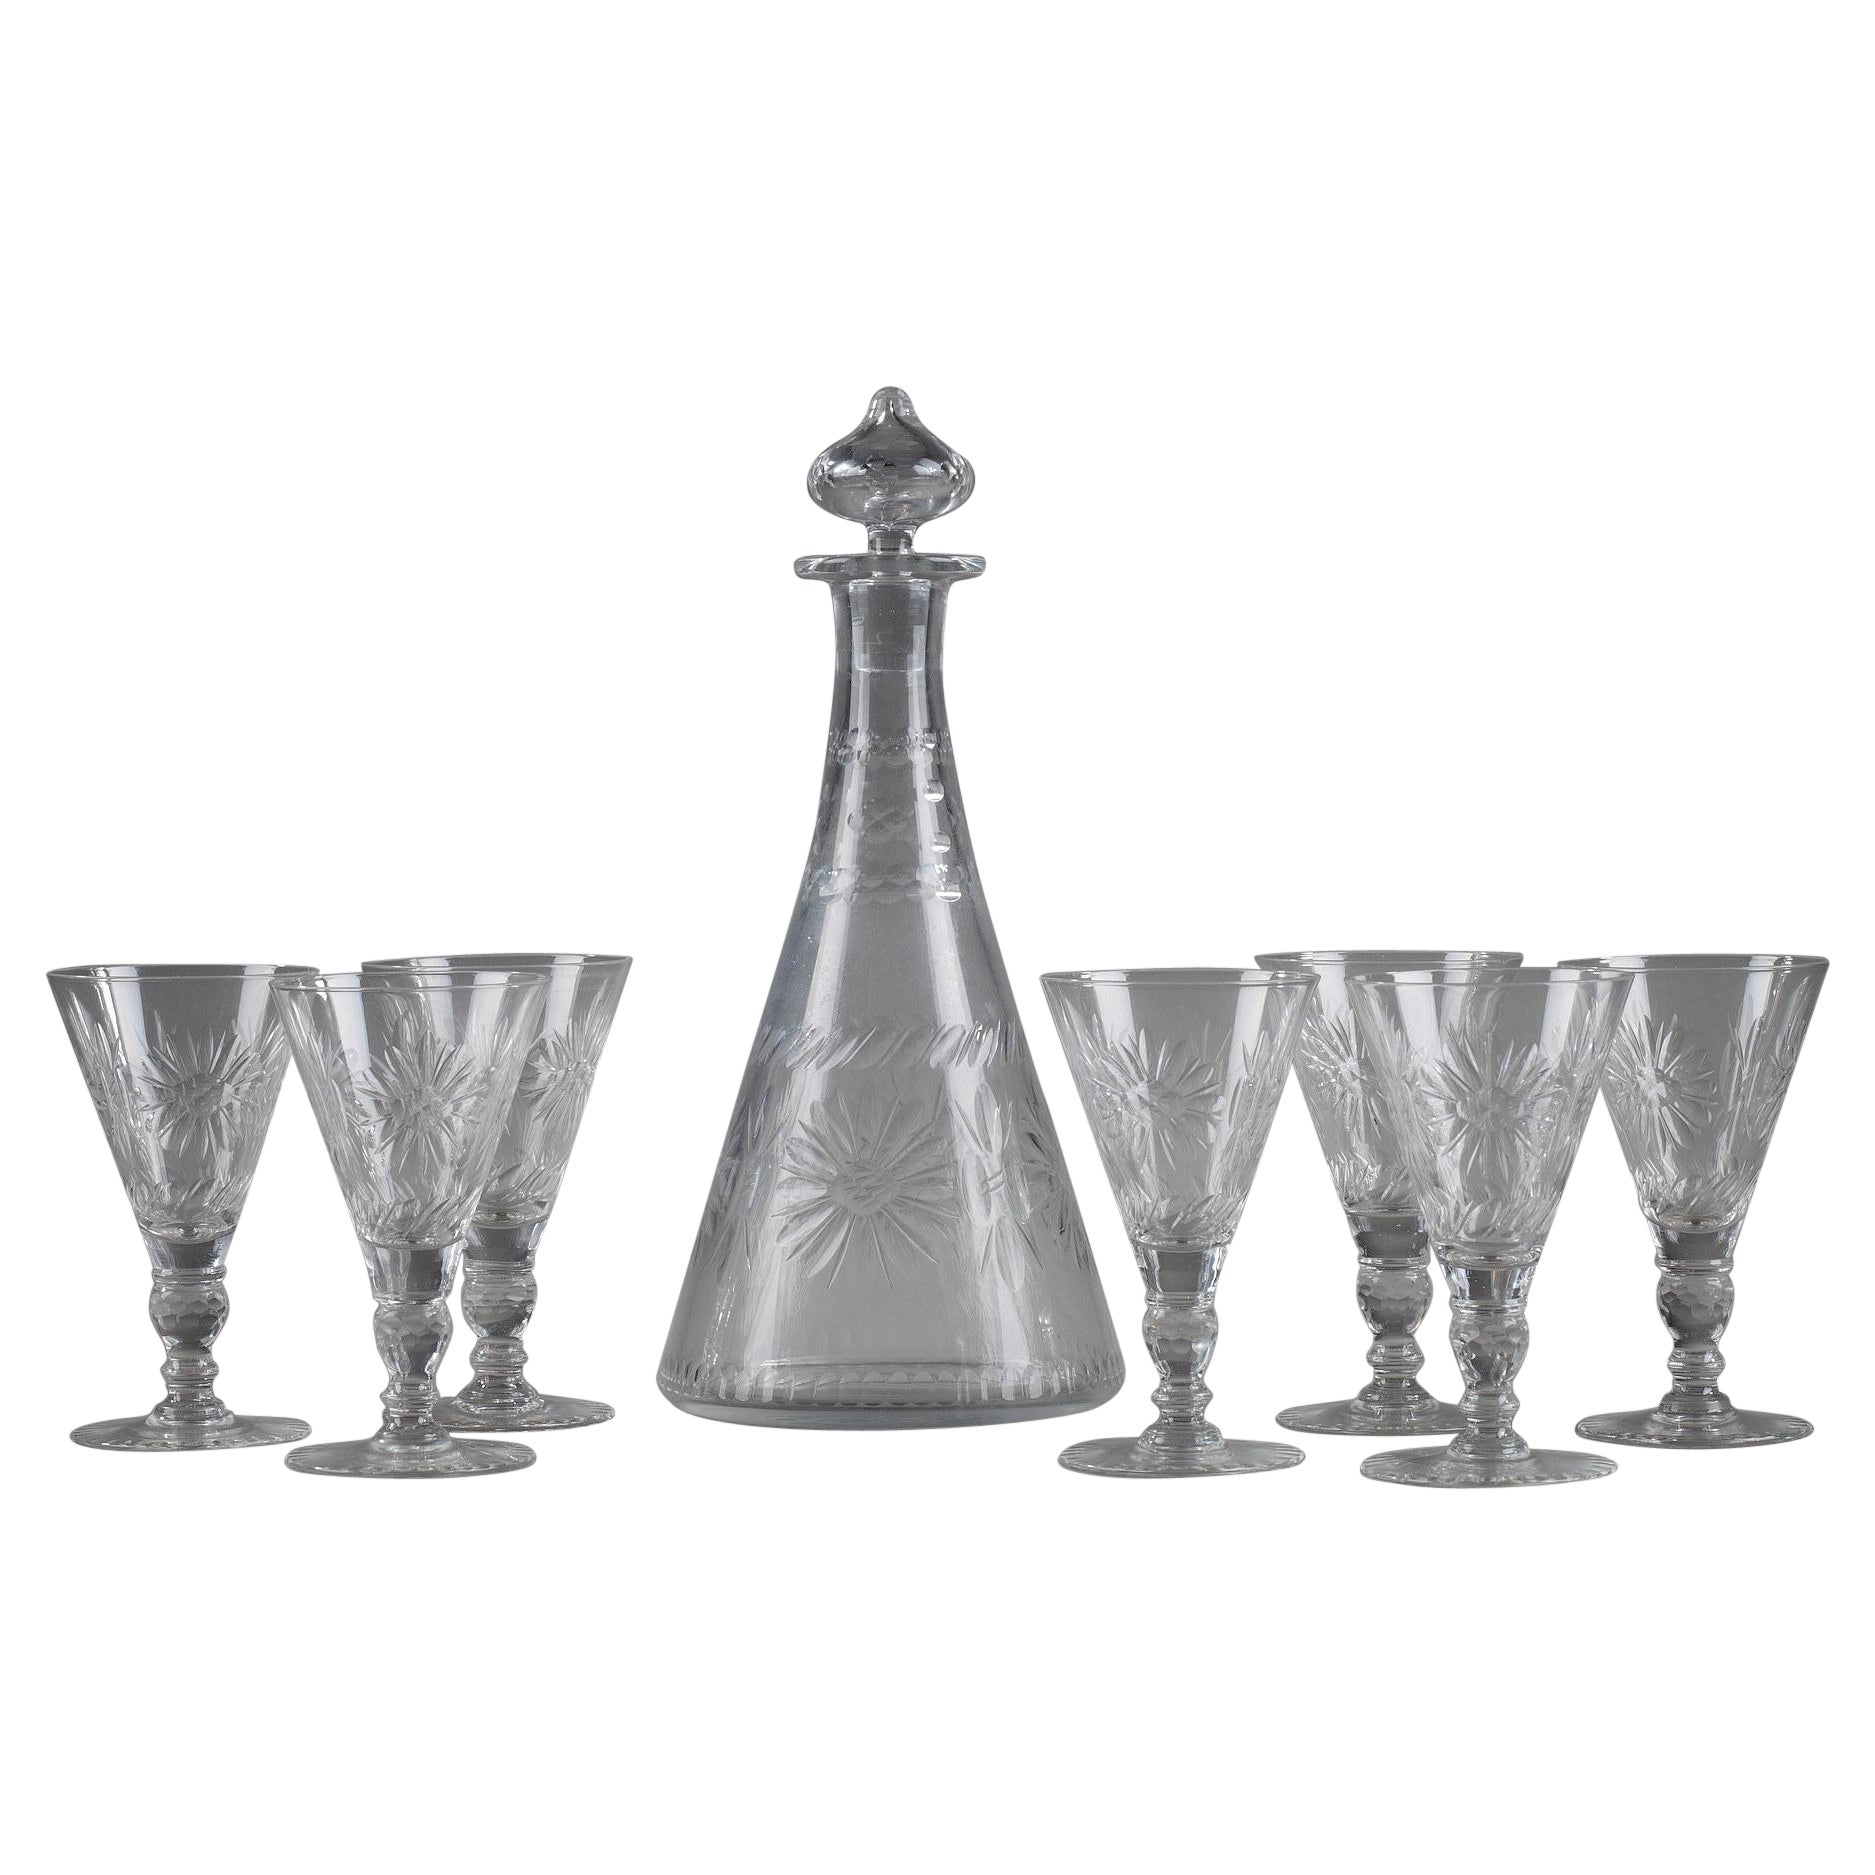 Set of 7 Crystal Glasses and a Pitcher For Sale